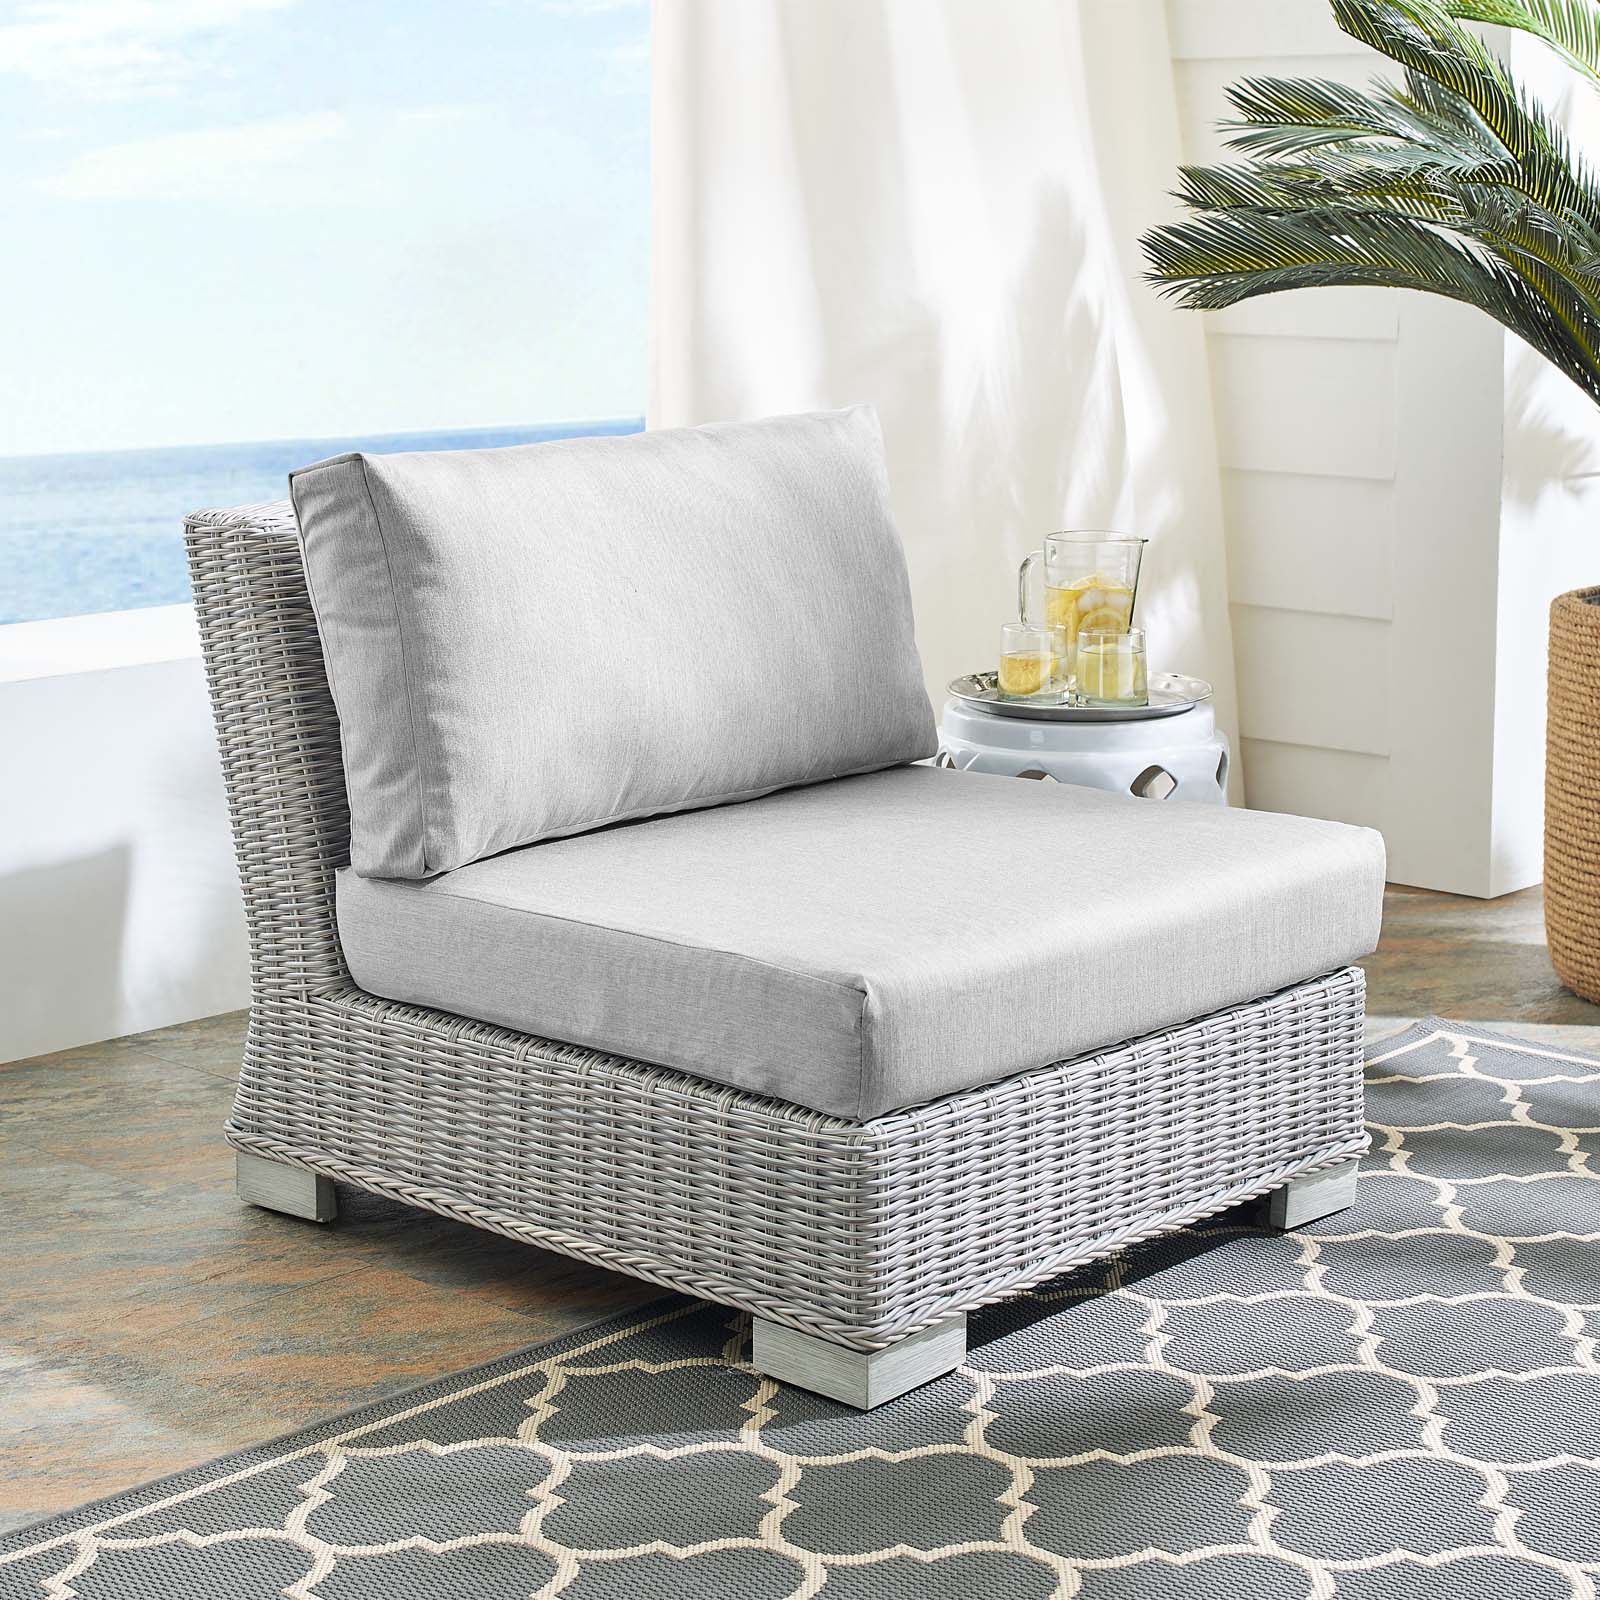 Modway Conway Sunbrella® Outdoor Patio Wicker Rattan Armless Chair in Light Gray Gray - image 1 of 9